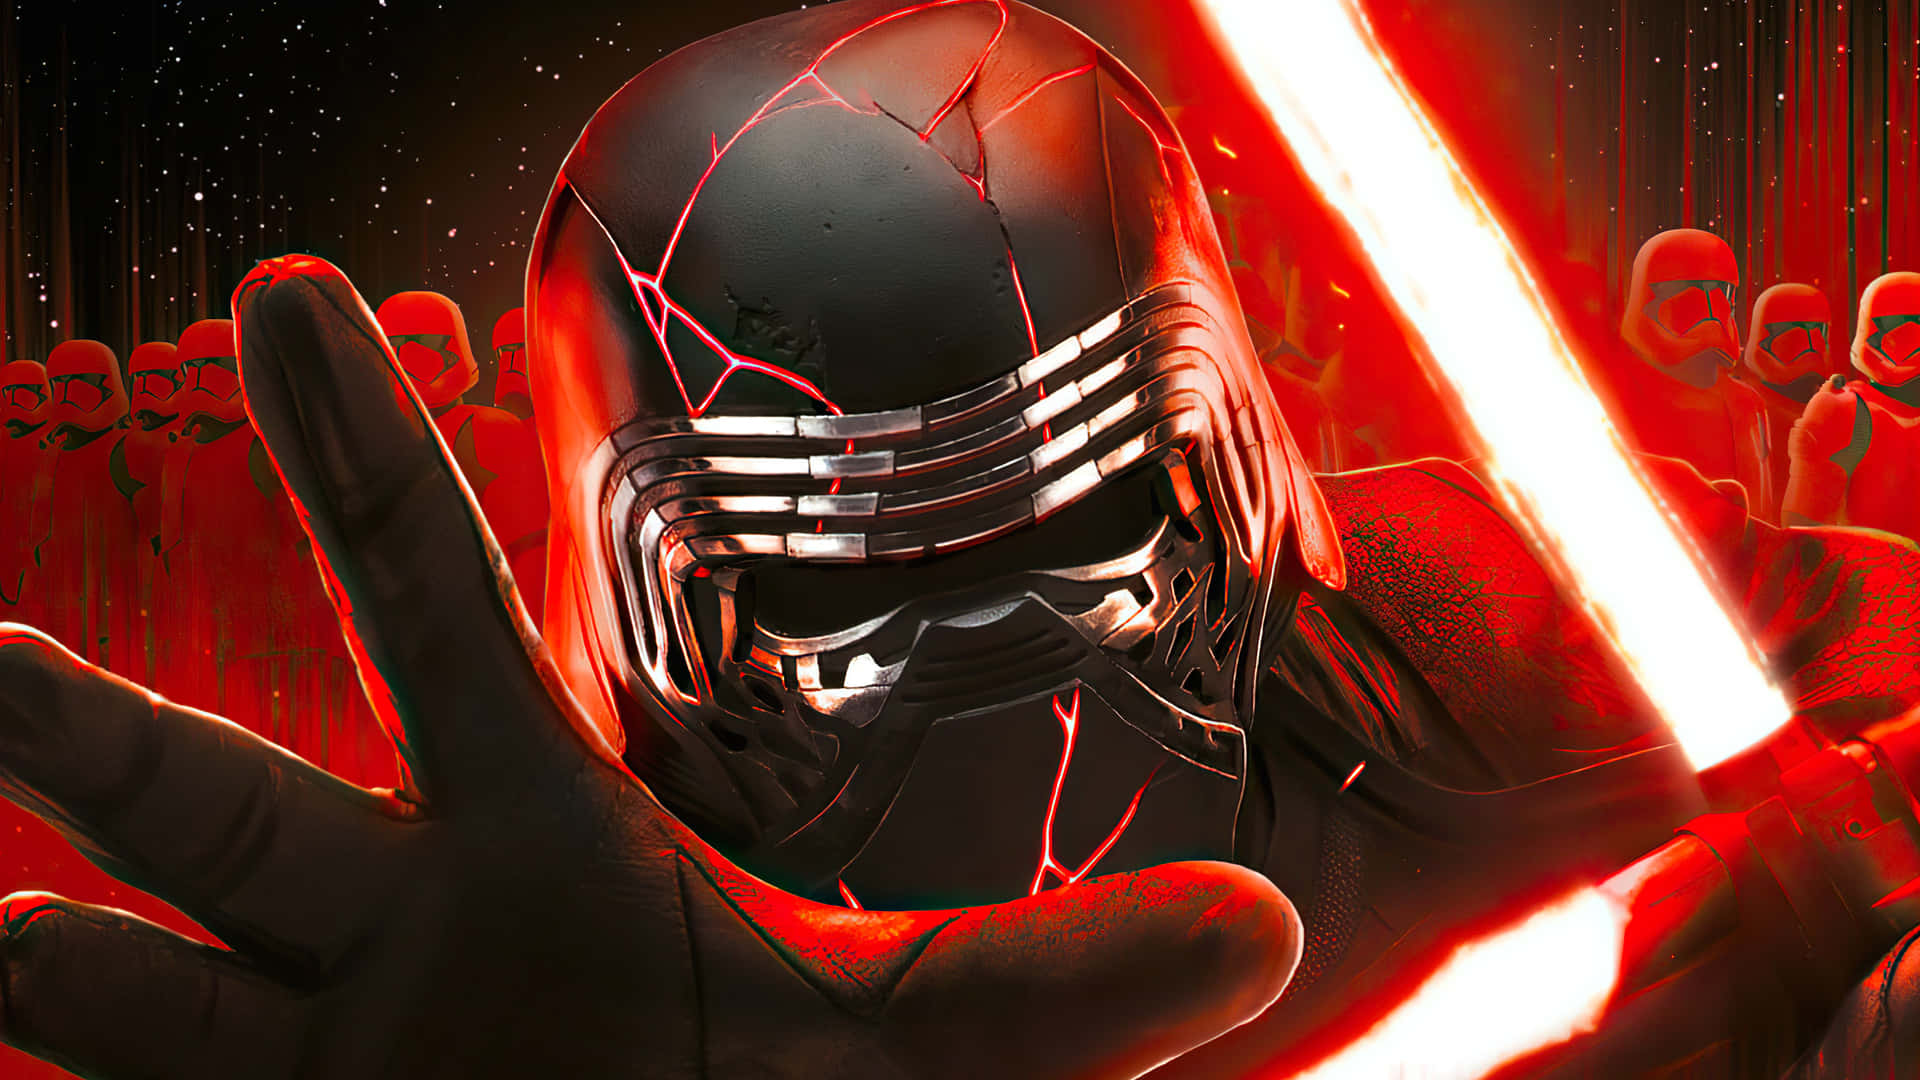 "Kylo Ren, a powerful and menacing presence in the Star Wars universe." Wallpaper